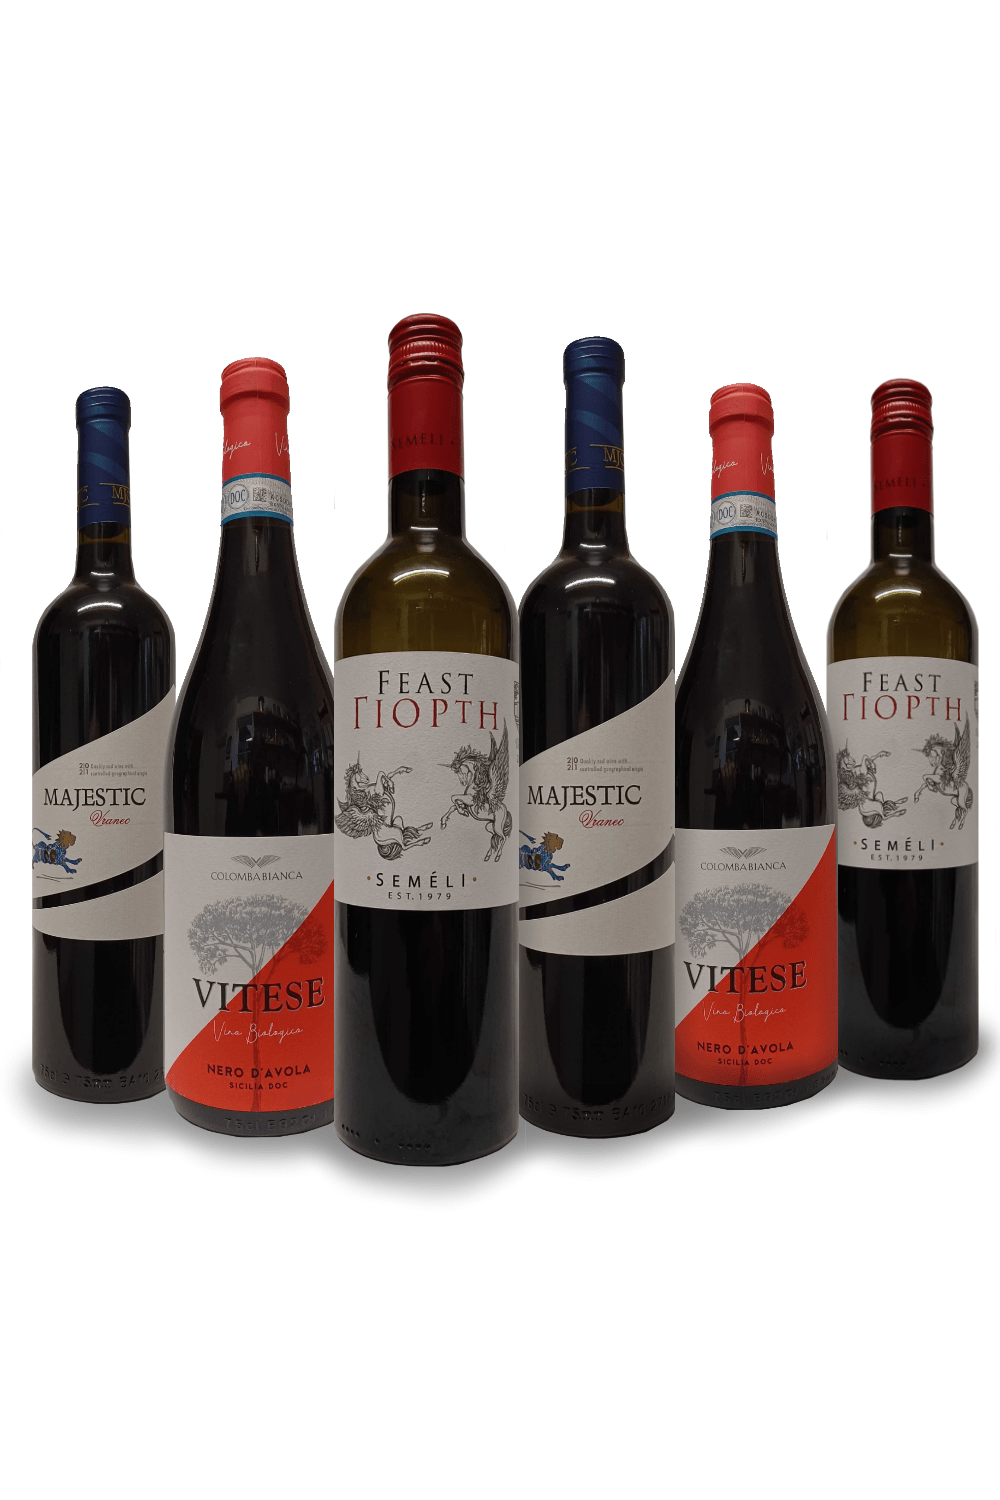 Novel Wines Mixed Case Great Value Mediterranean Red Wines - Six Bottle Mixed Case Offer